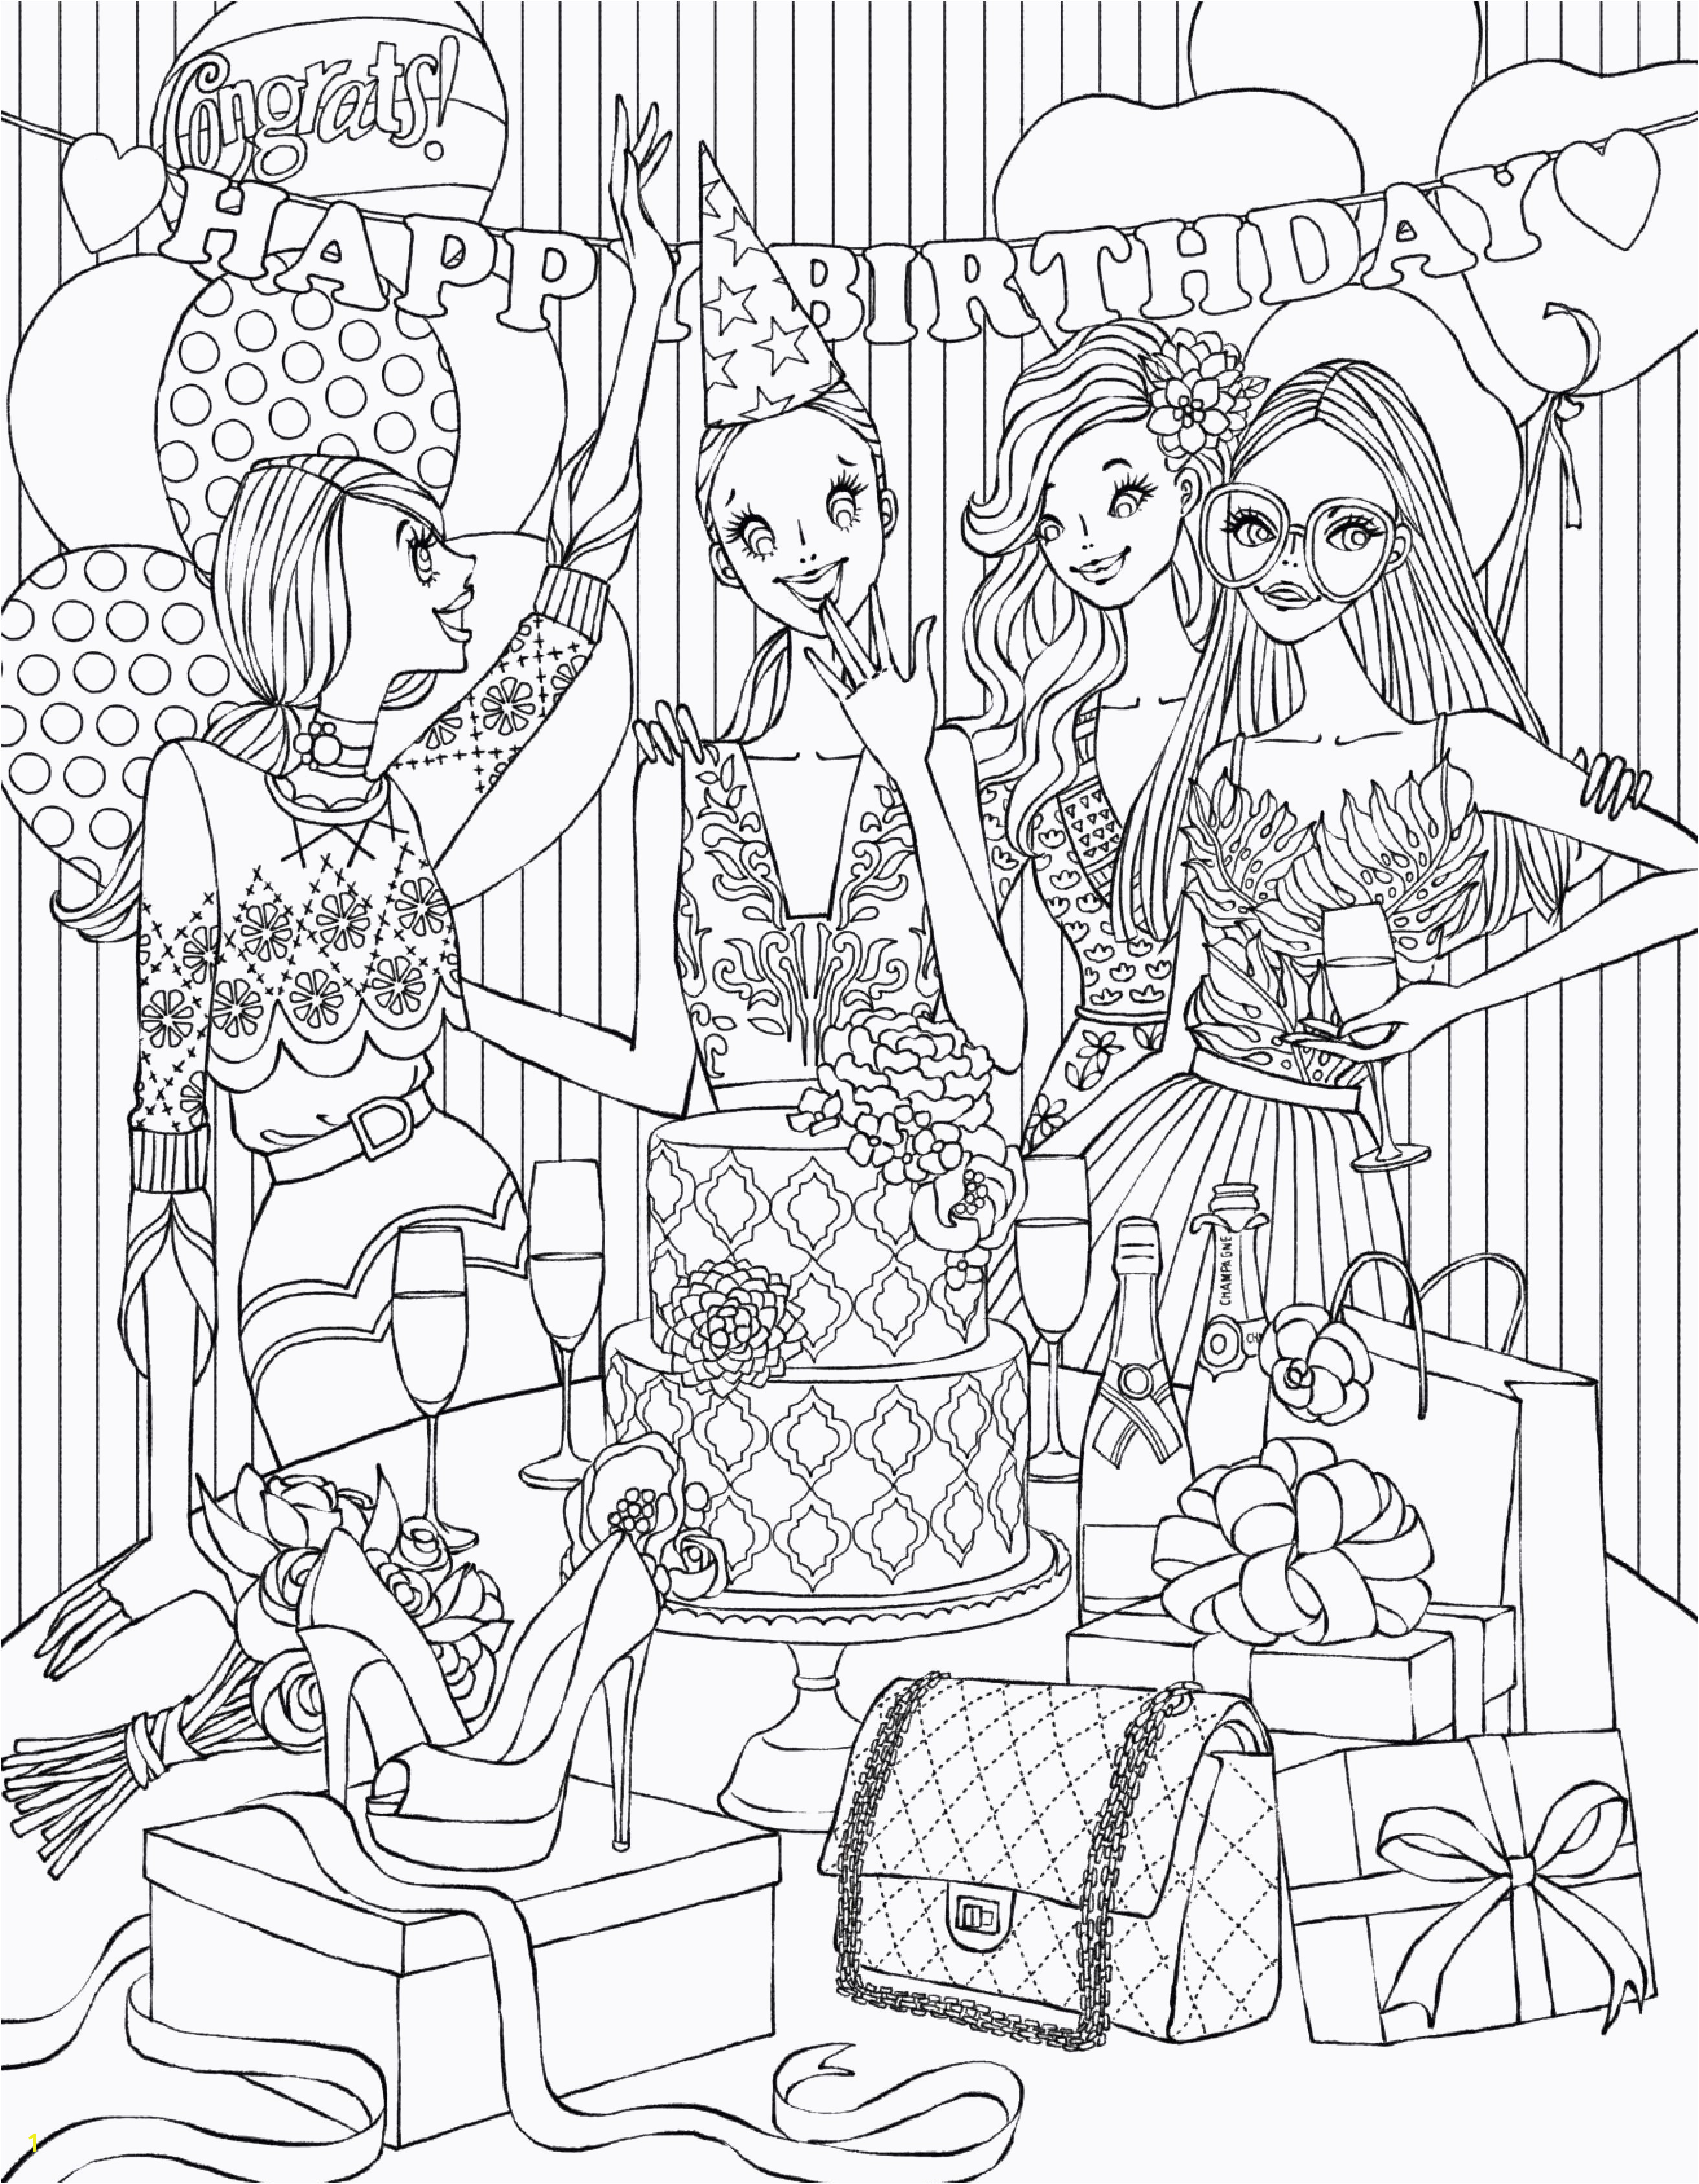 Holiday Printable Coloring Pages Free Printable Holiday Coloring Pages Holiday Coloring Book